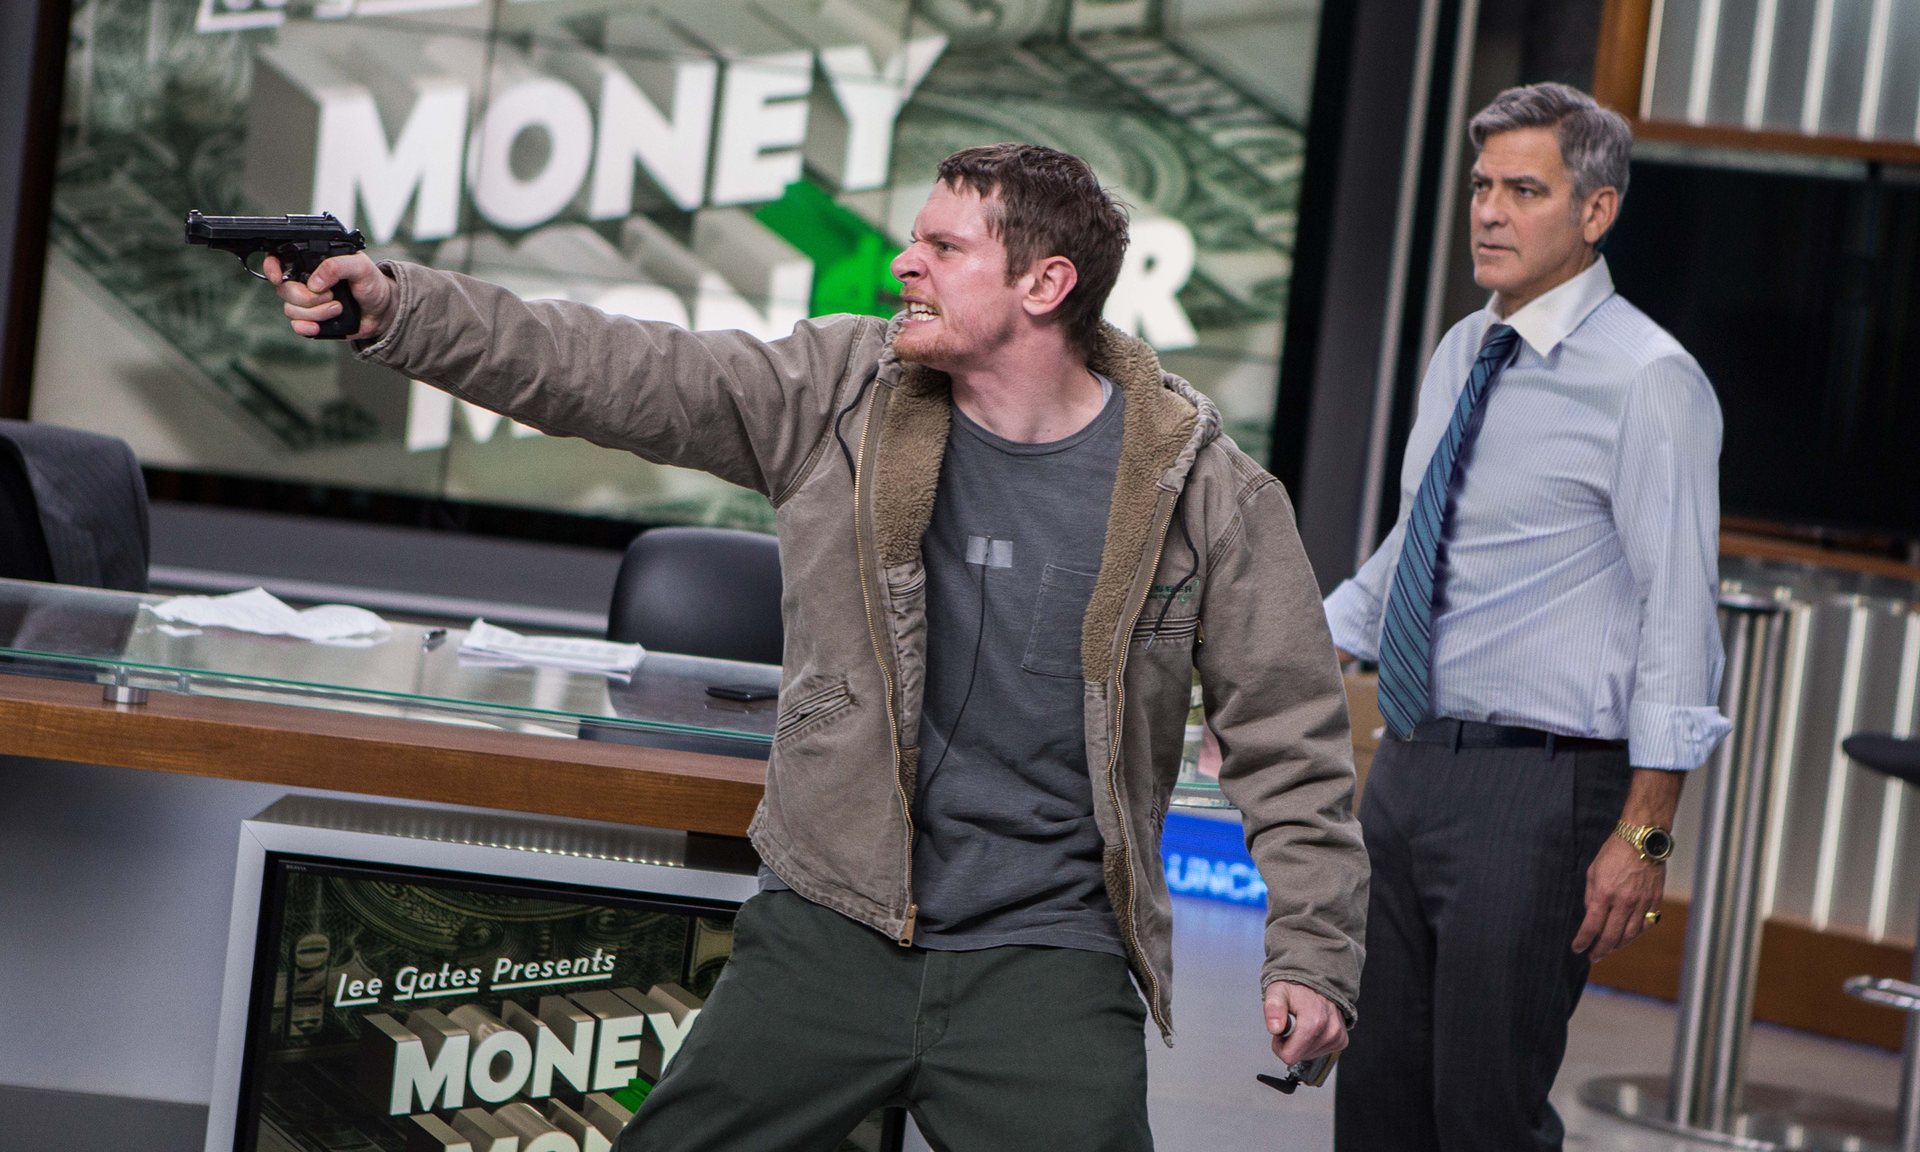 MONEY MONSTER Doesn’t Provide a Big Return on Your Investment